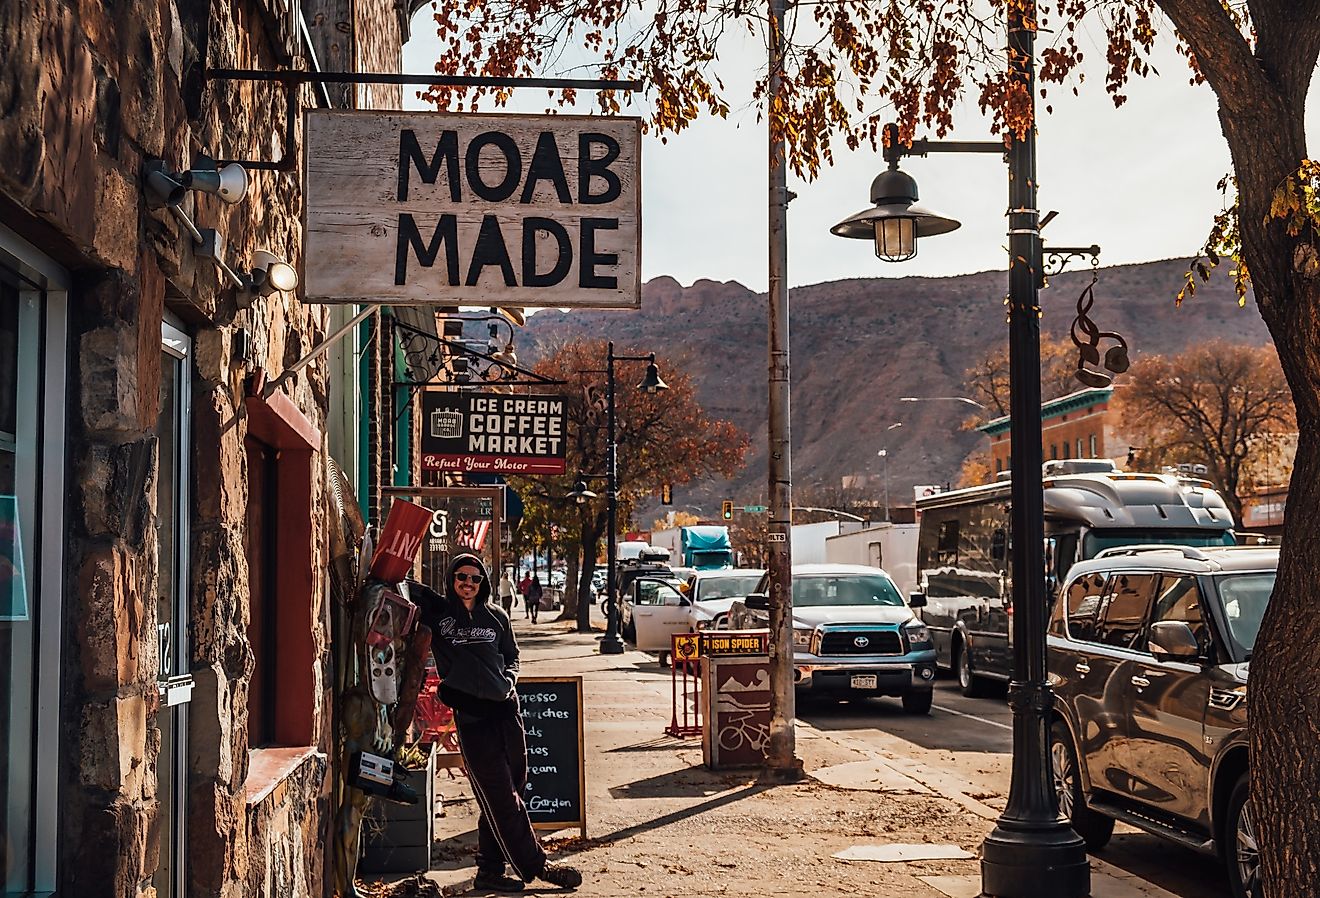 The charming town of Moab, Utah. Editorial credit: Ilhamchewadventures / Shutterstock.com.